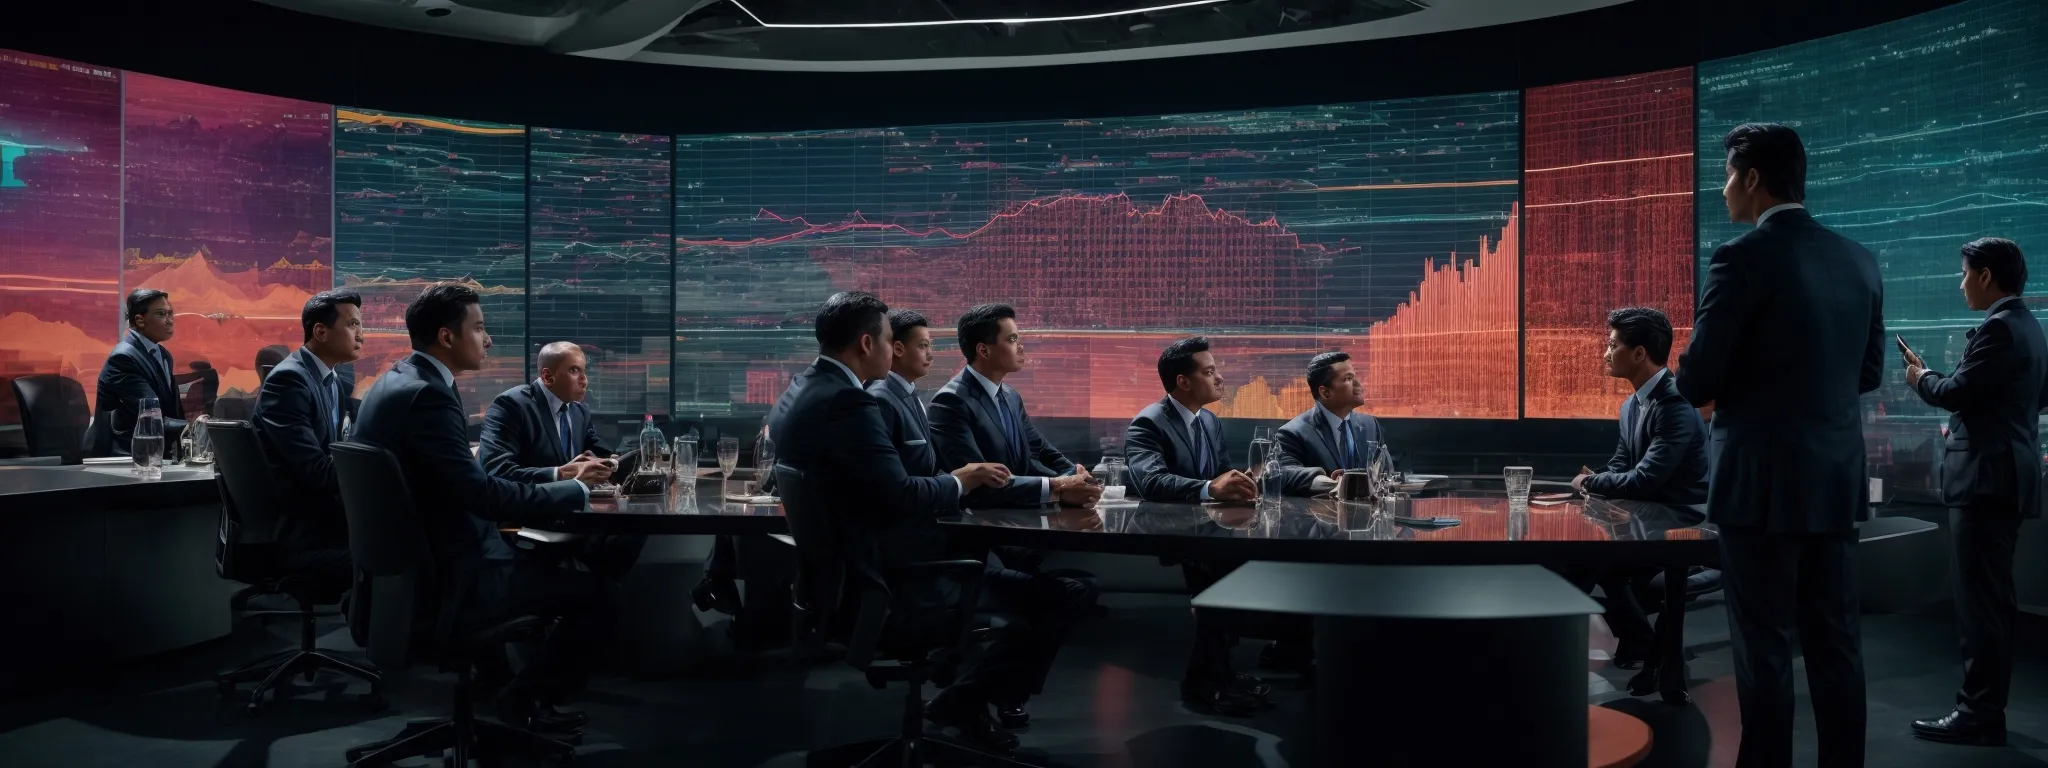 executives discussing around a large screen displaying colorful data visualizations.